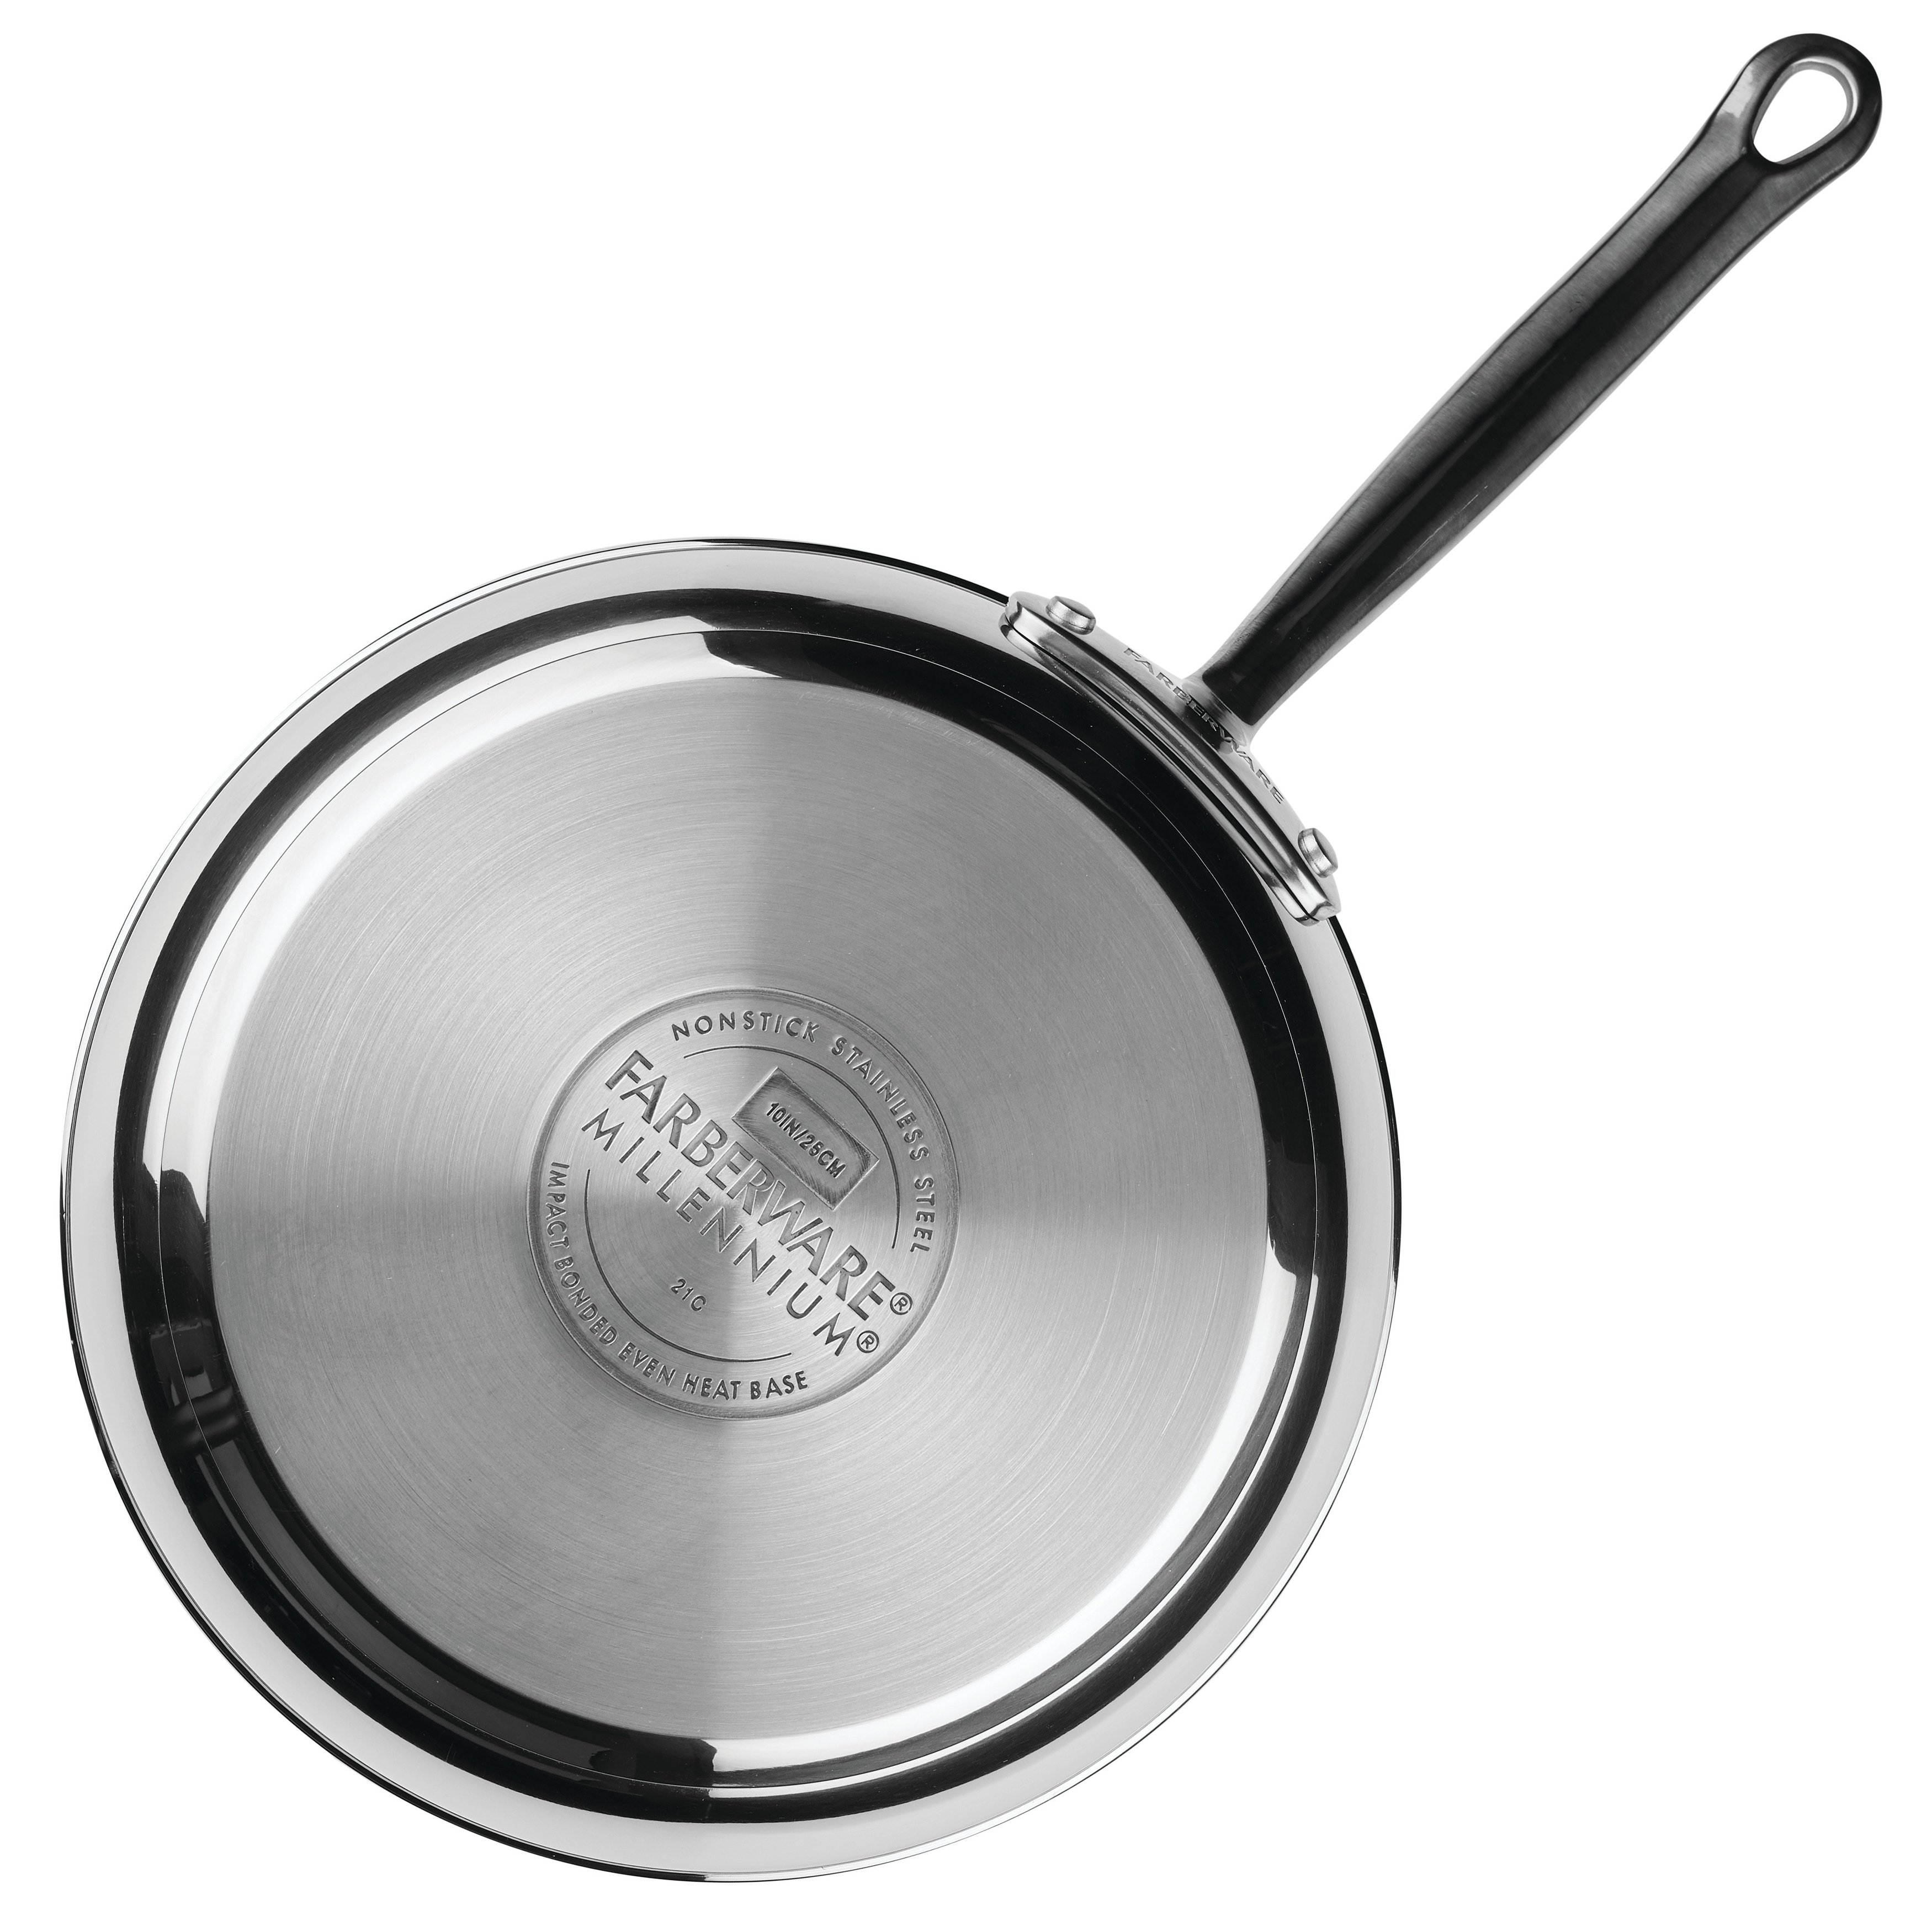 https://ak1.ostkcdn.com/images/products/is/images/direct/b4de1936ca8184b59ea49cff8f1a067ccdaa8364/Farberware-Millennium-Stainless-Steel-Nonstick-Cookware-Induction-Pots-and-Pans-Set%2C-10-Piece.jpg